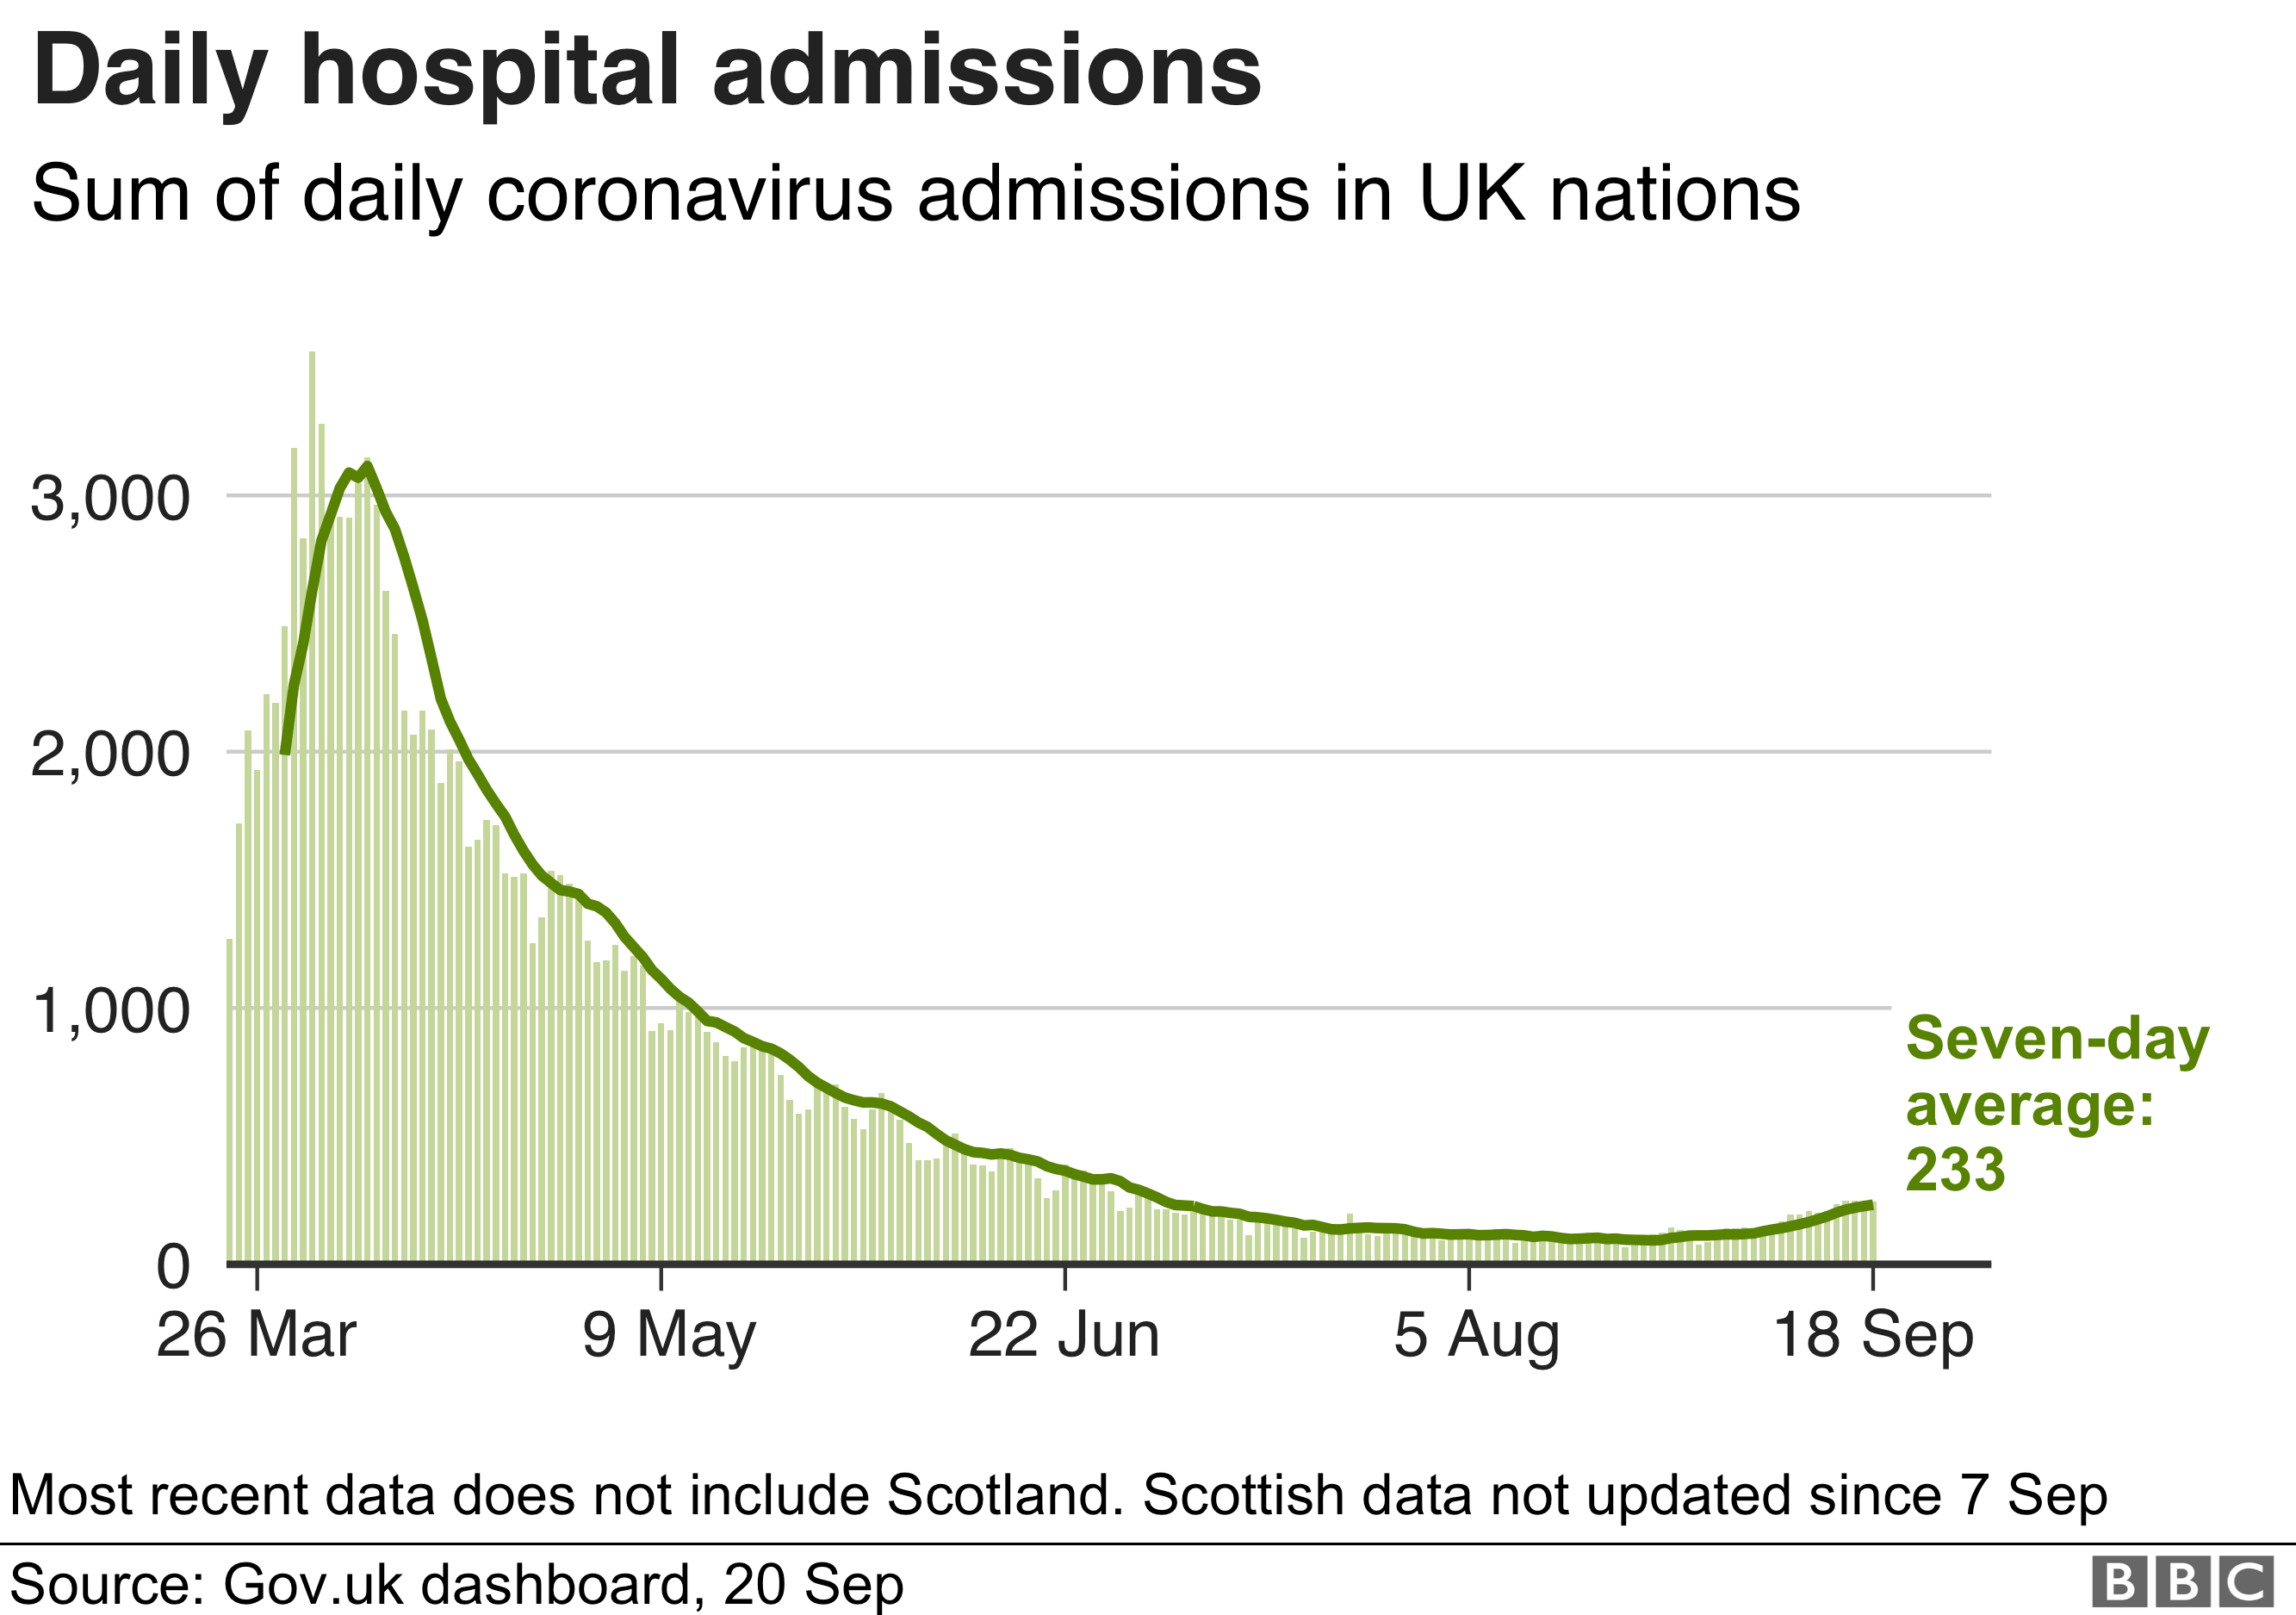 Graph showing daily hospital admissions